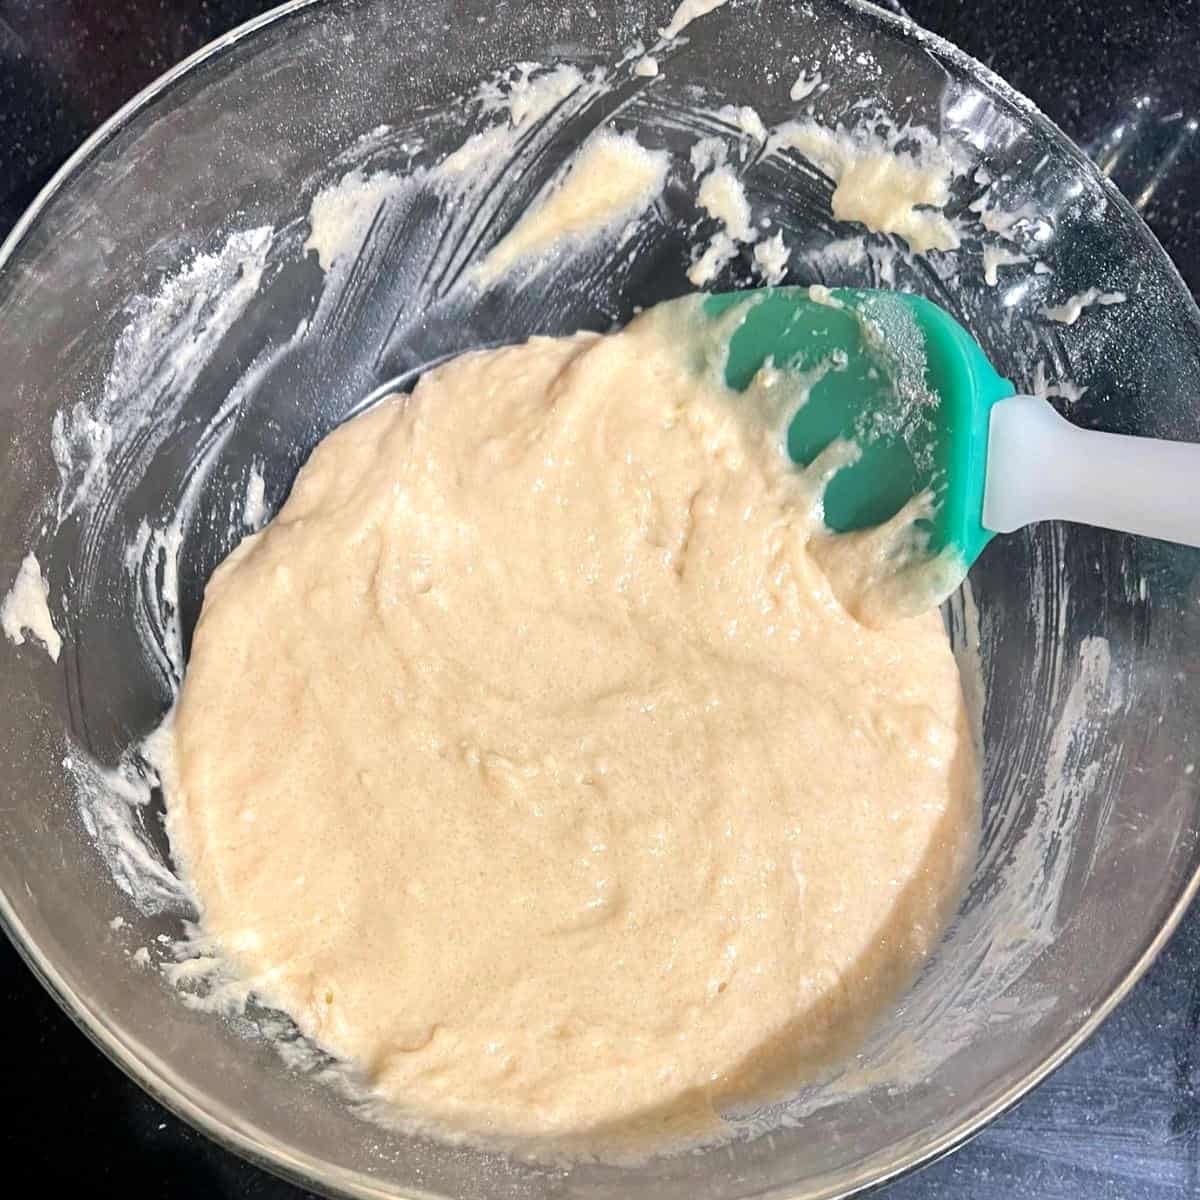 Cake batter in bowl with spatula.